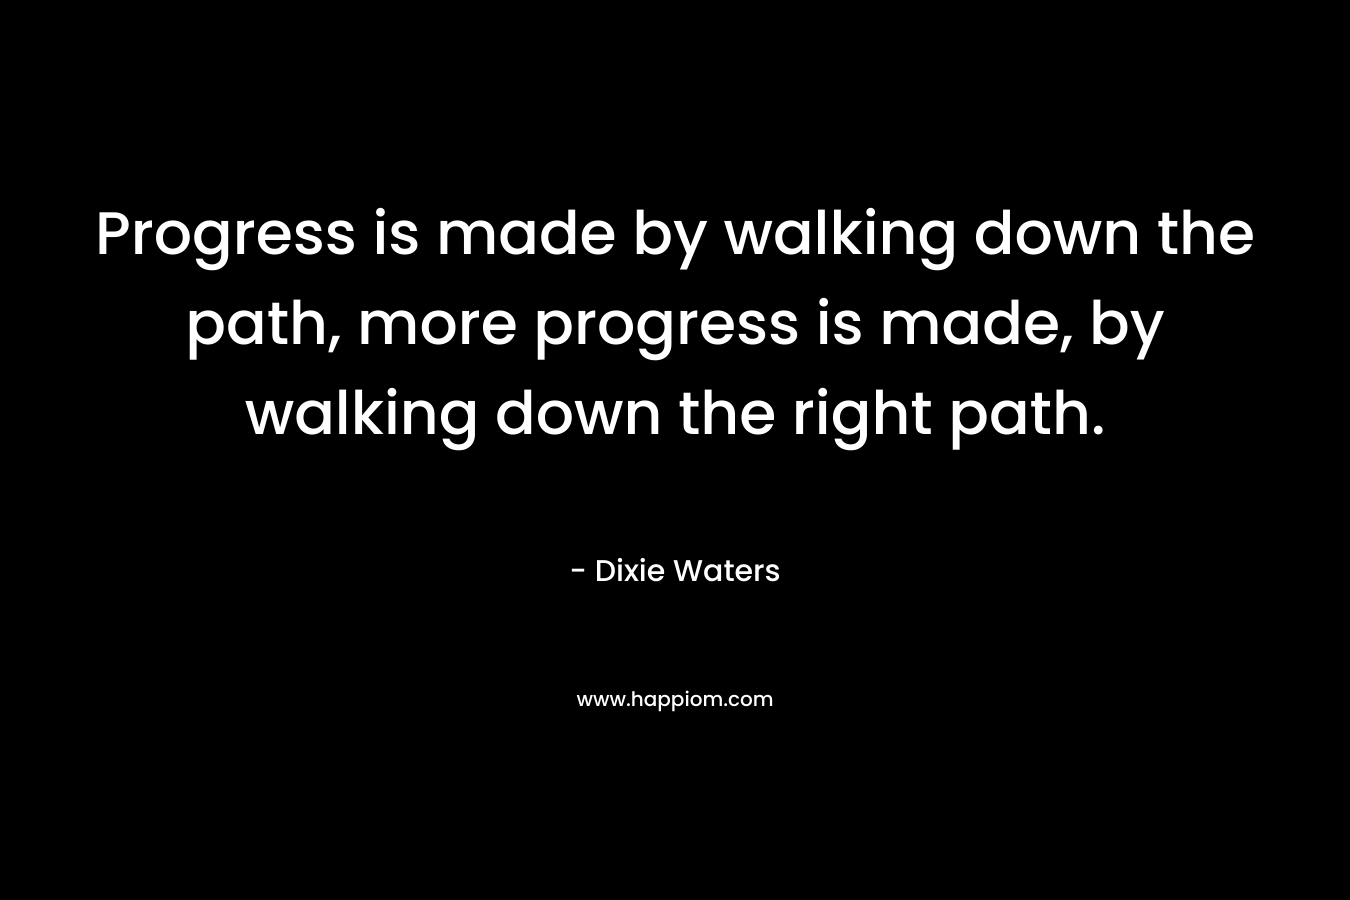 Progress is made by walking down the path, more progress is made, by walking down the right path.